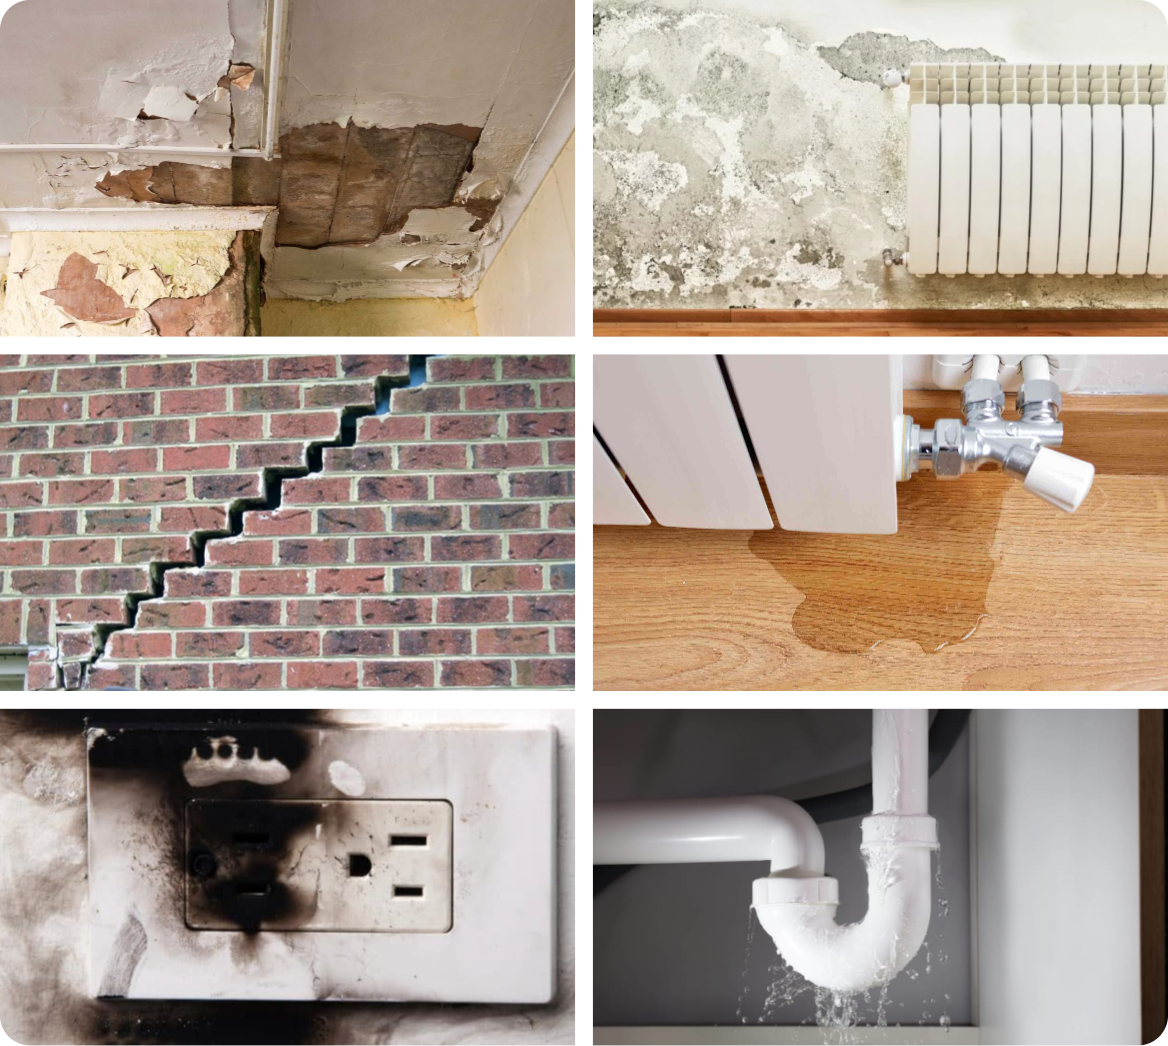 Examples of Housing Disrepair claims, given by CEL Solicitors.